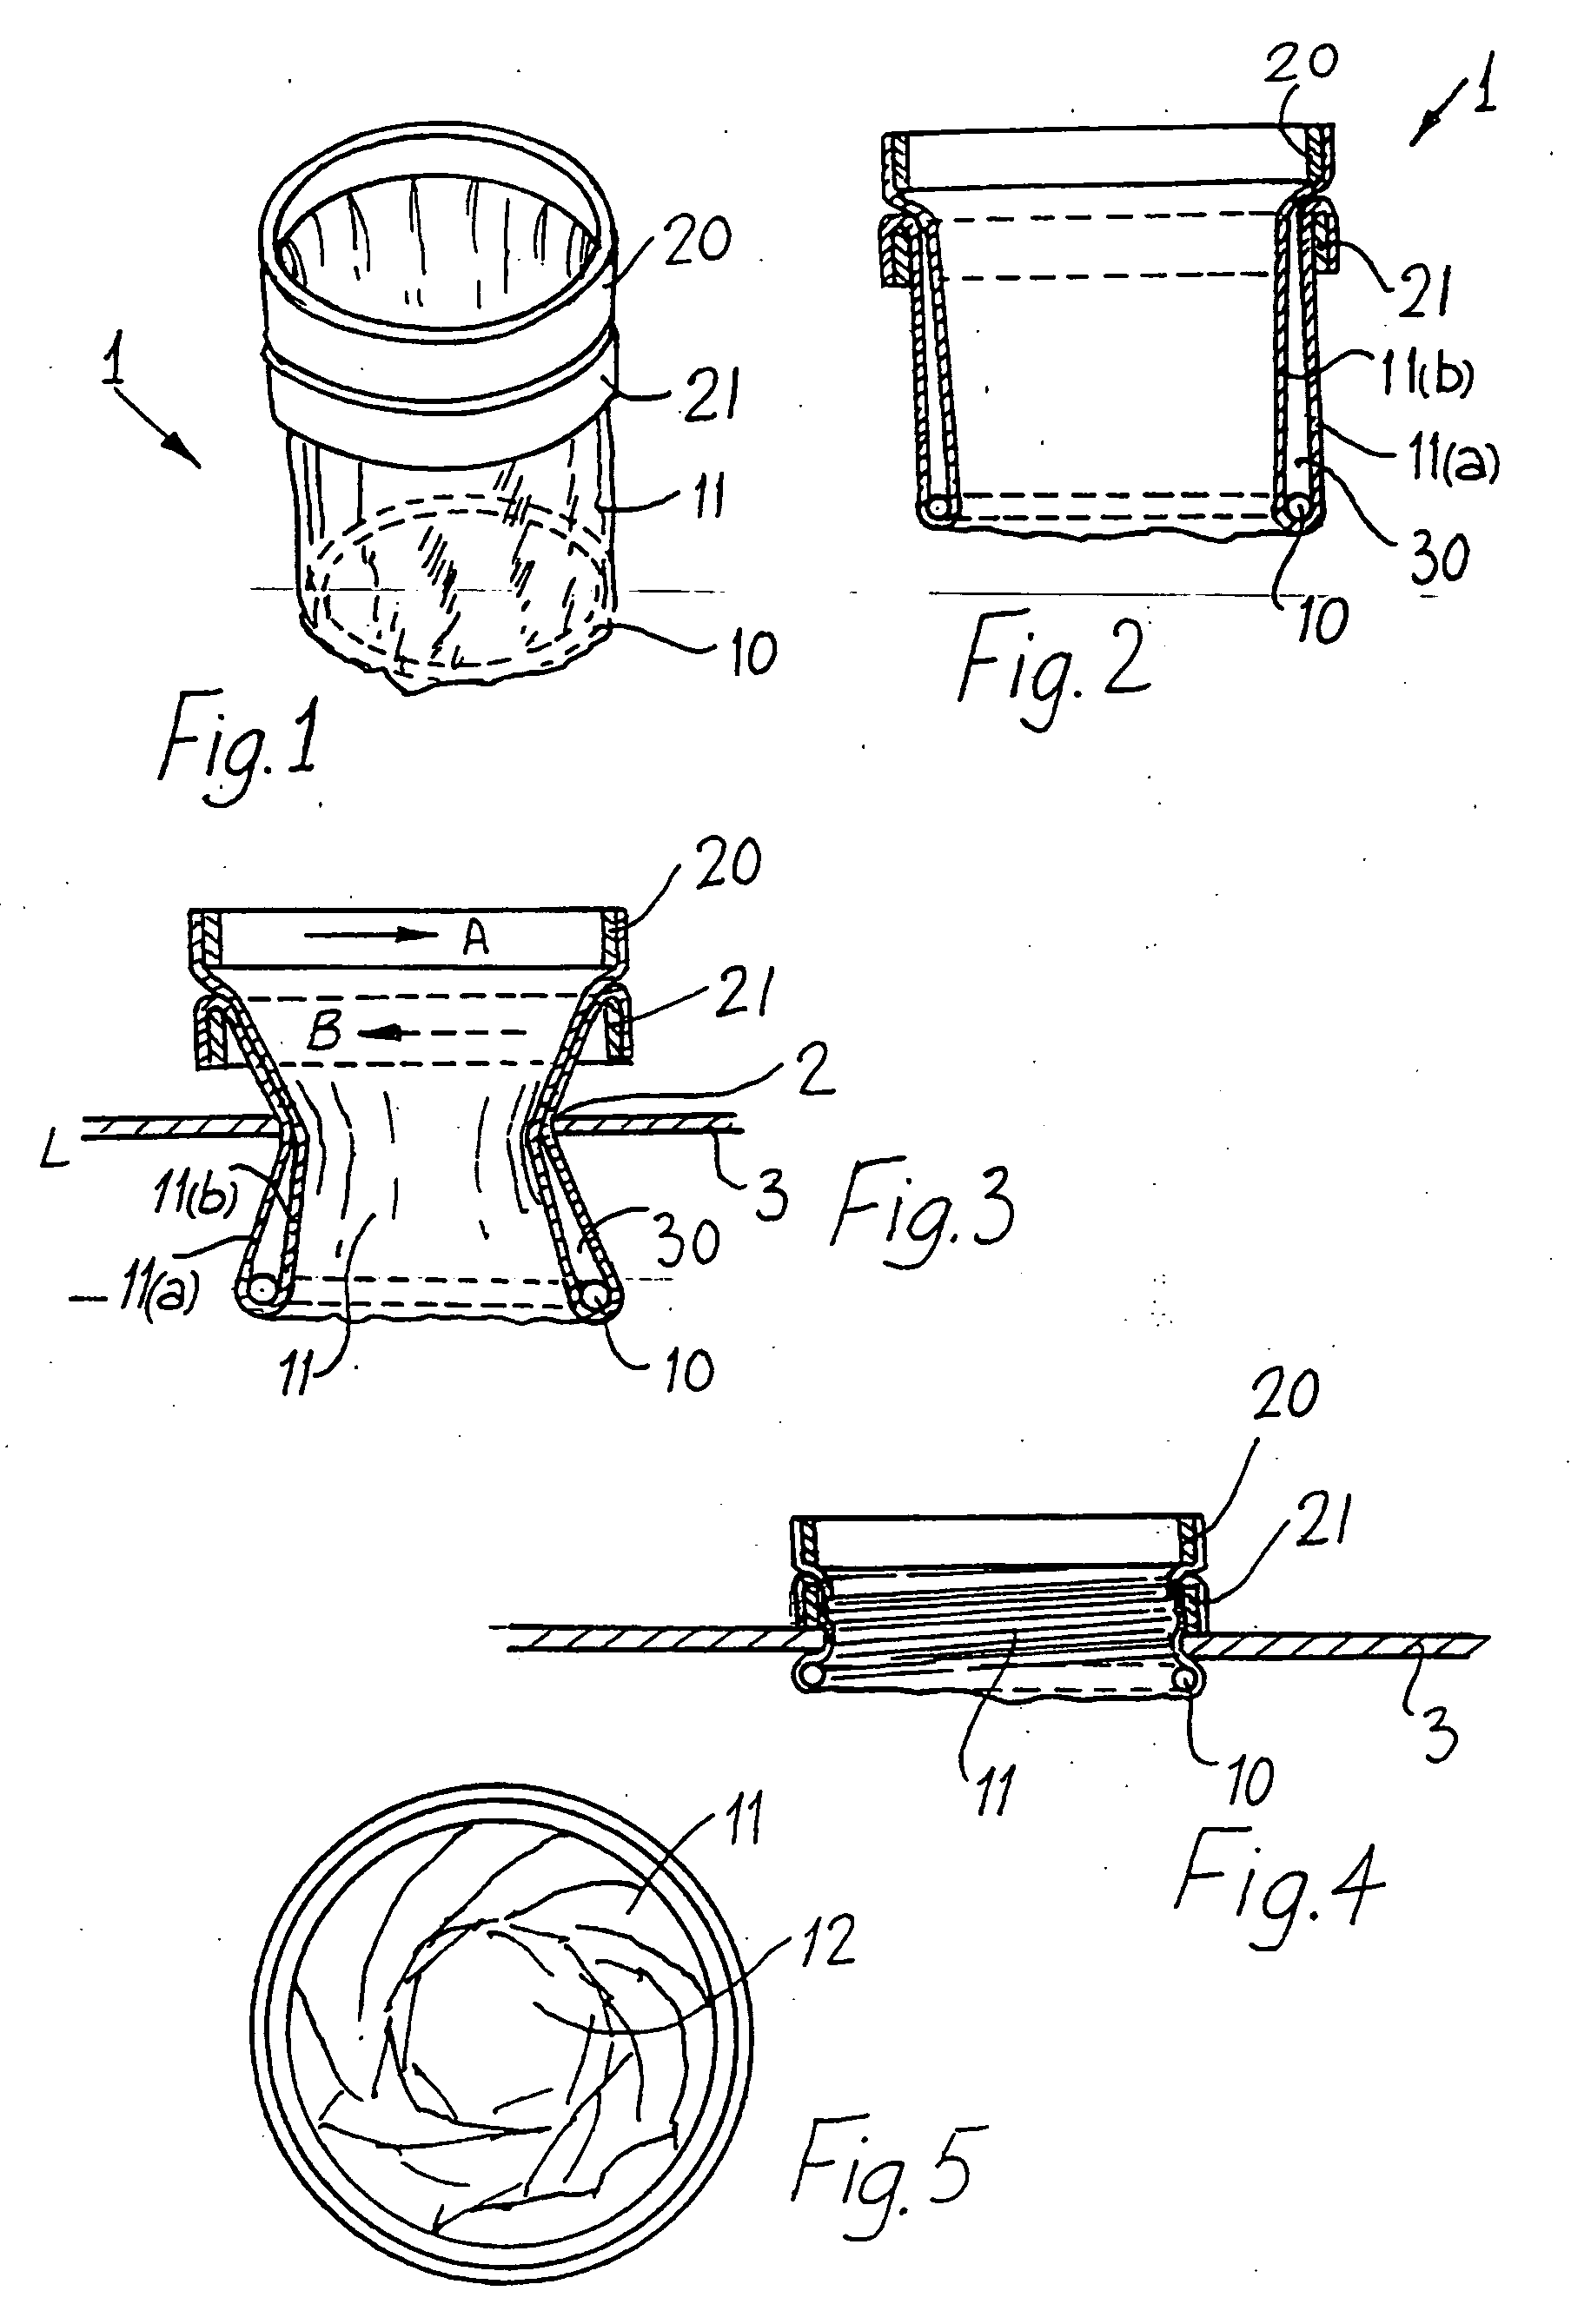 Surgical device for retracting and/or sealing an incision